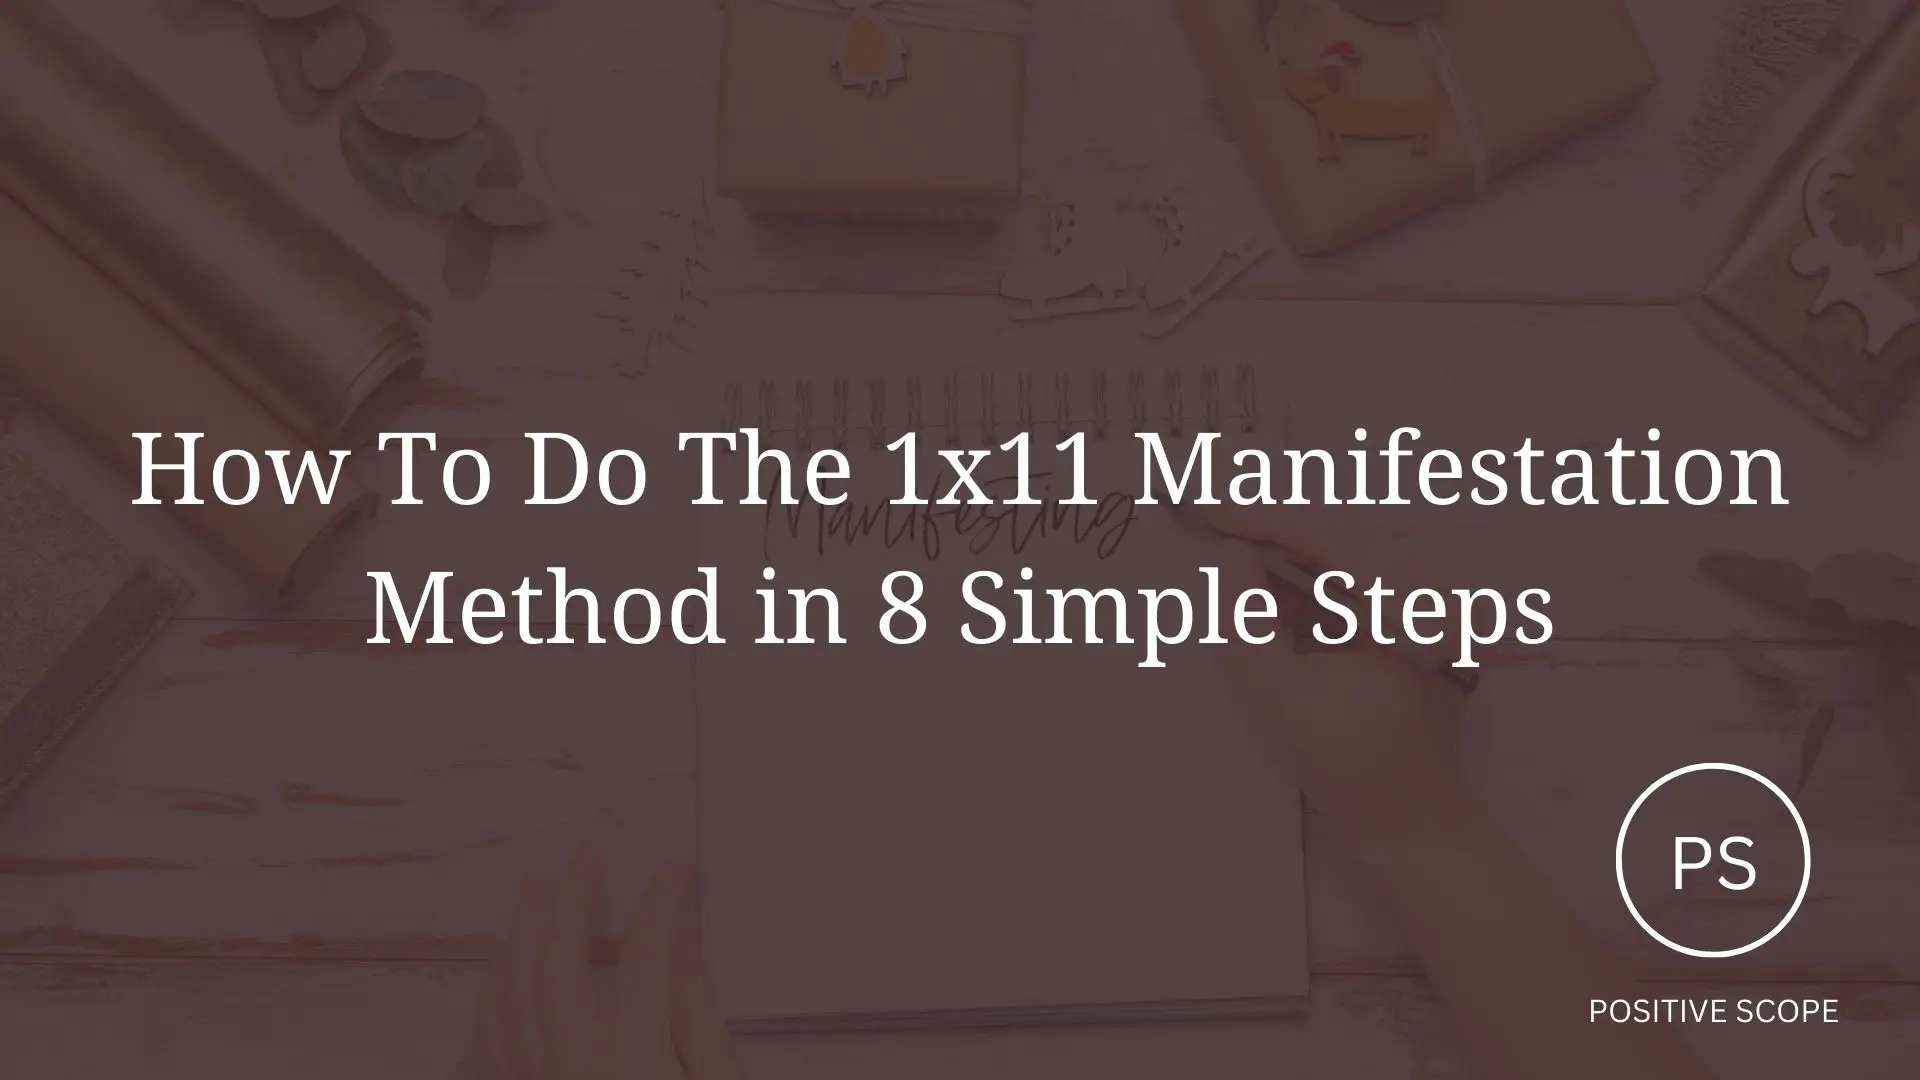 How To Do The 1×11 Manifestation Method in 8 Simple Steps